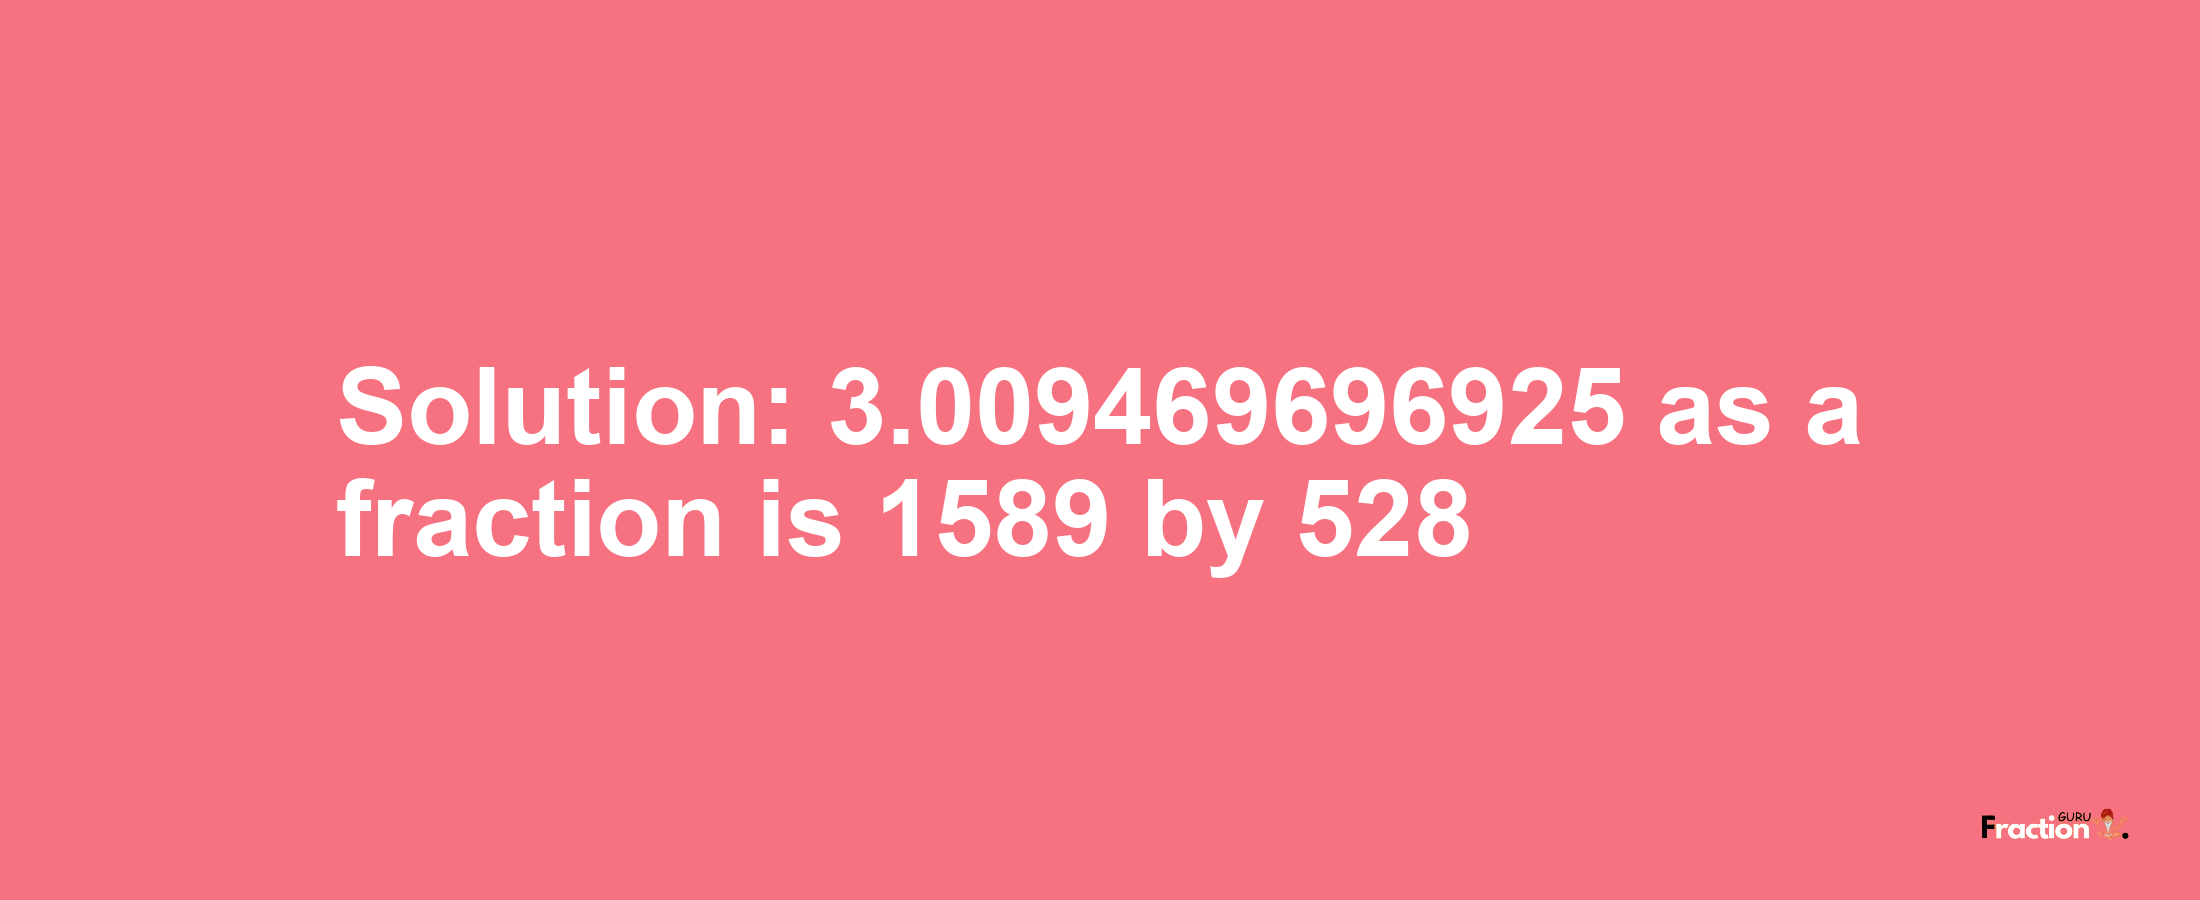 Solution:3.009469696925 as a fraction is 1589/528